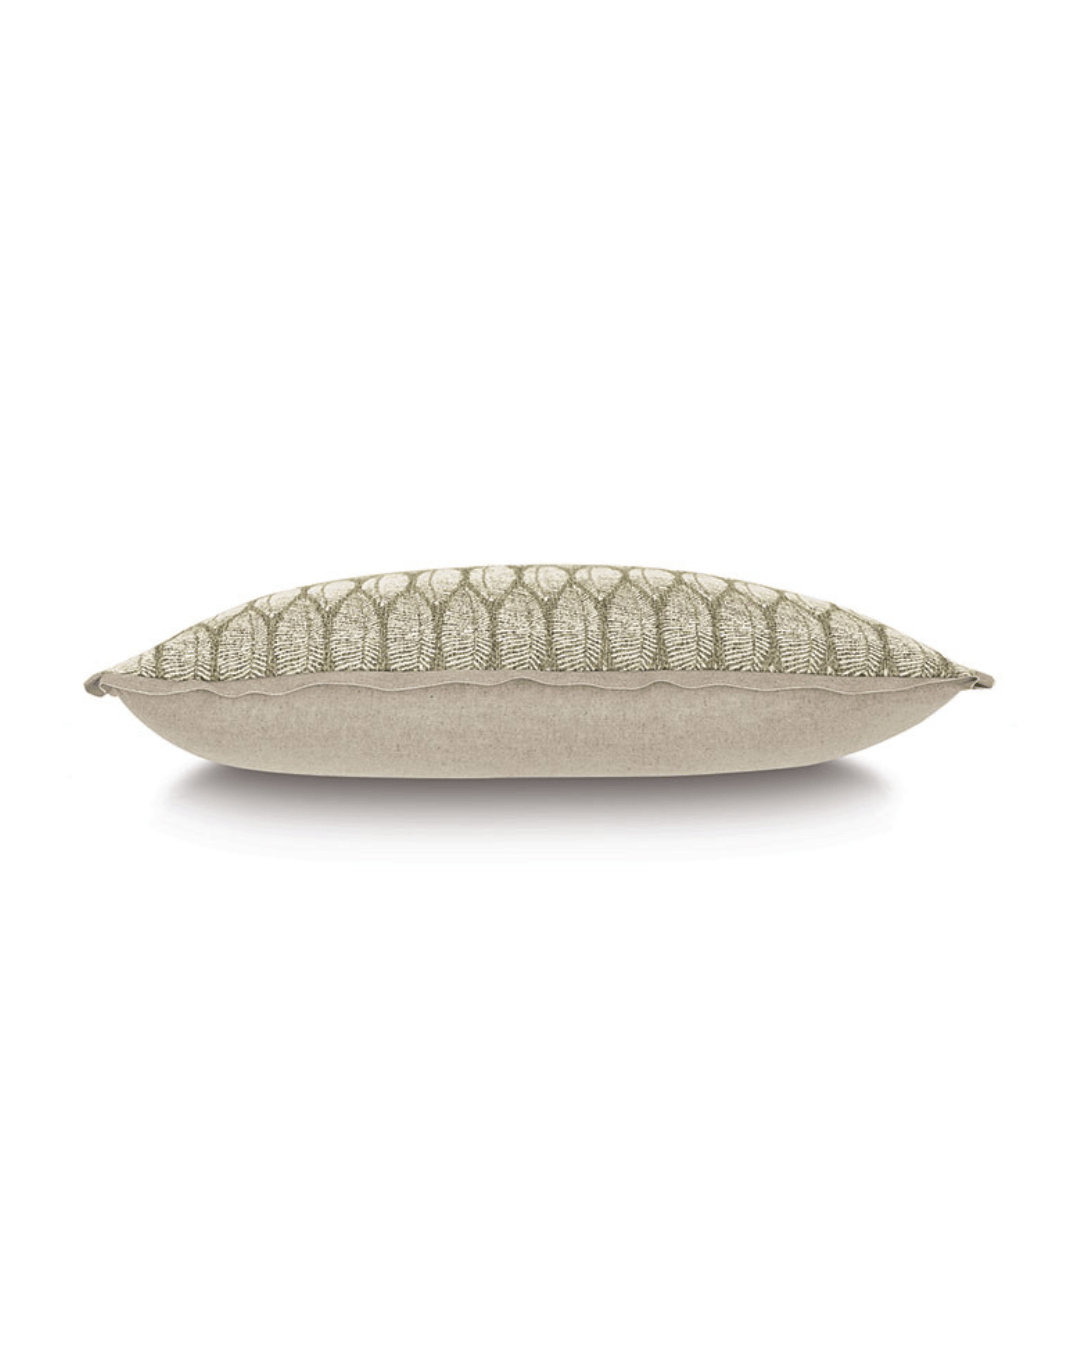 A long, rectangular Butterfly Pleat Pillow with a beige bottom half and a green embroidered top half, displayed on a white background in a Scottsdale Arizona bungalow by Eastern Accents.